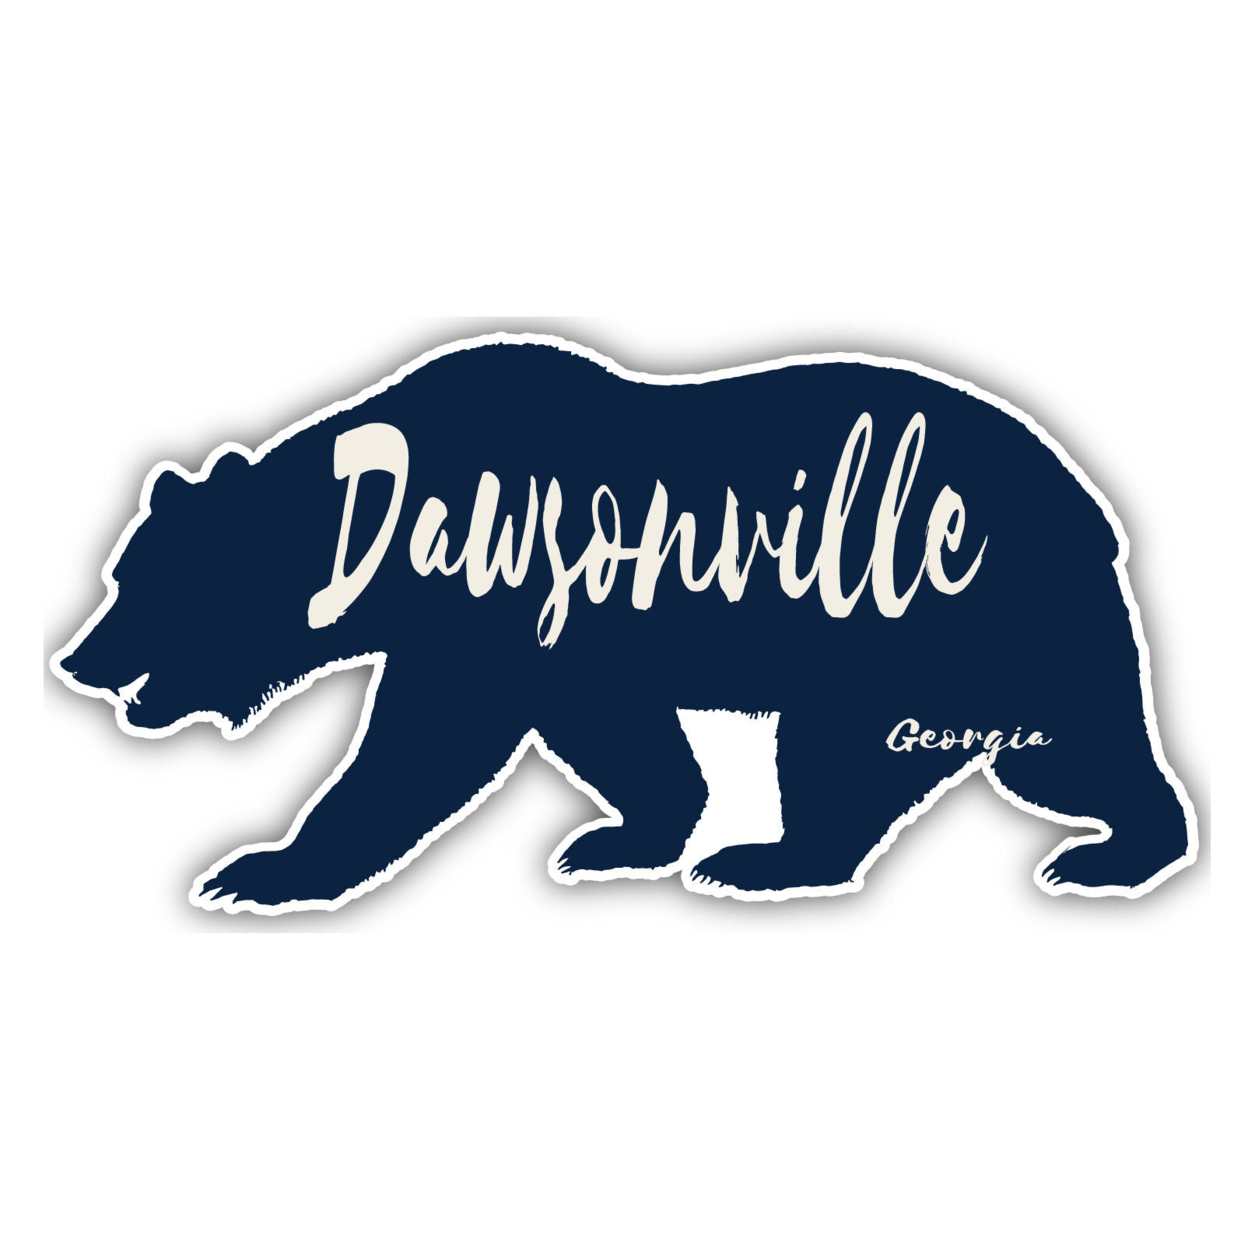 Dawsonville Georgia Souvenir Decorative Stickers (Choose Theme And Size) - 4-Pack, 8-Inch, Great Outdoors